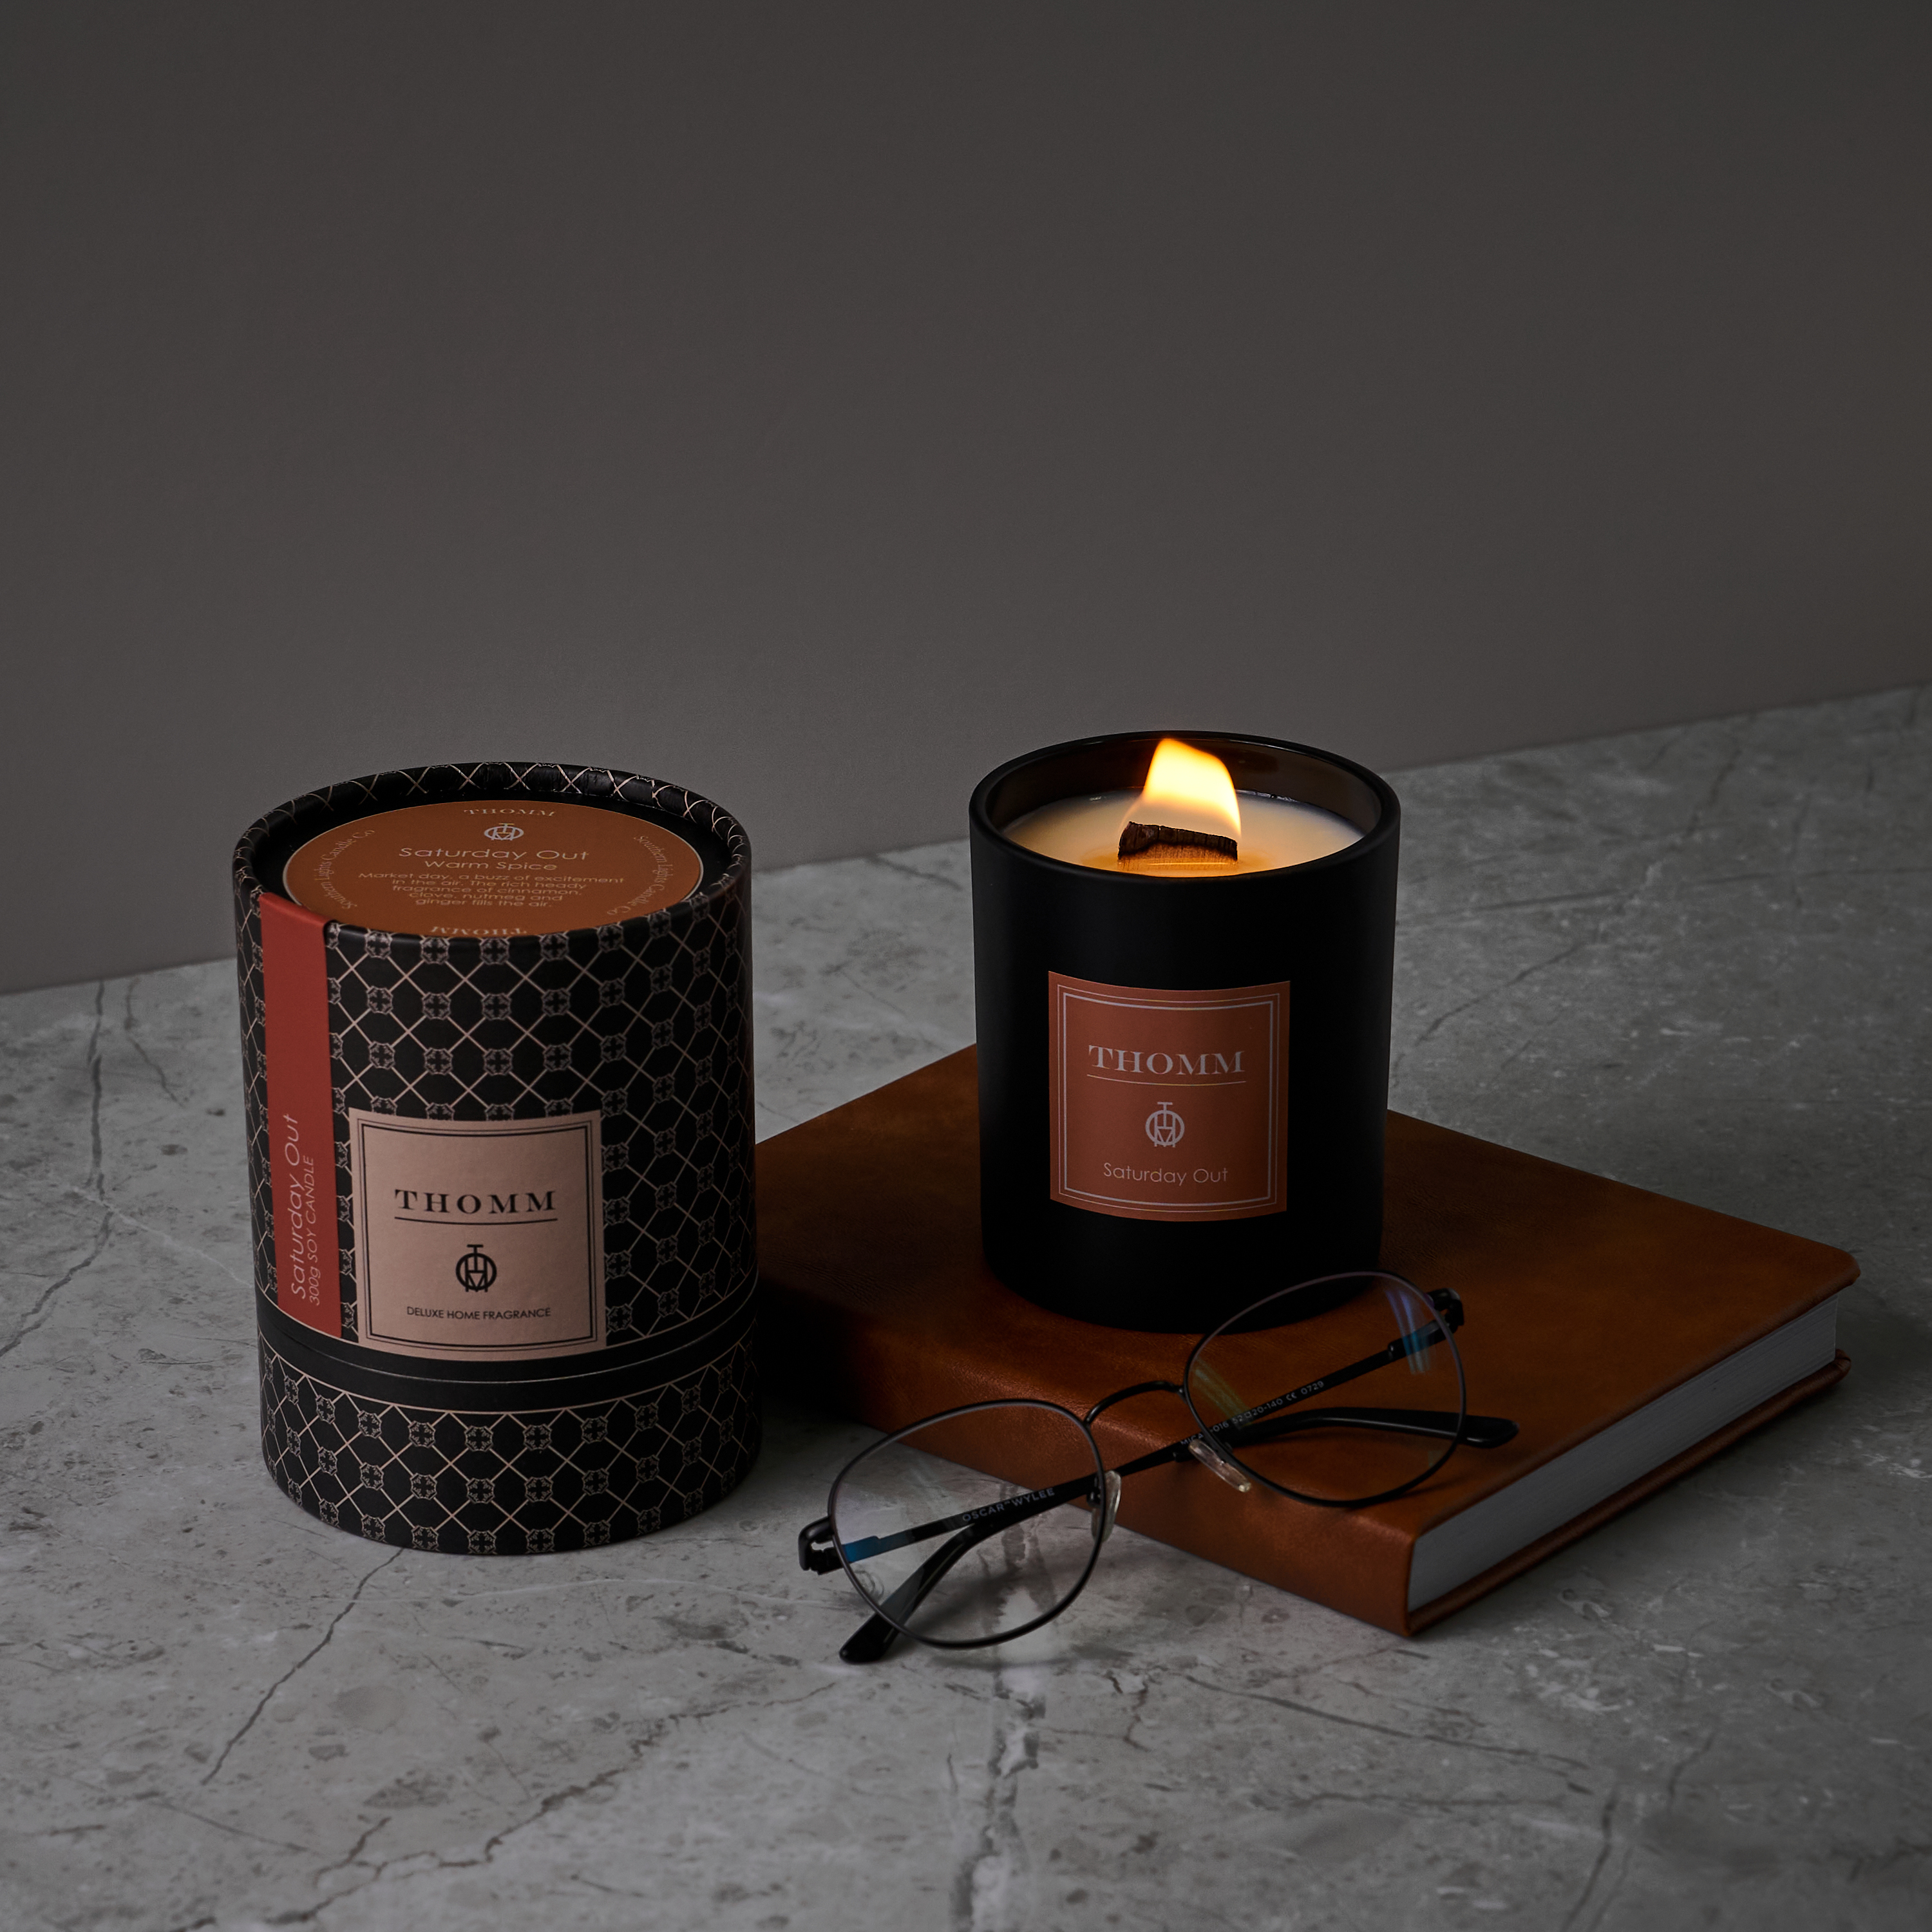 'Saturday Out' (Warm Spice) - 300g Soy Candle